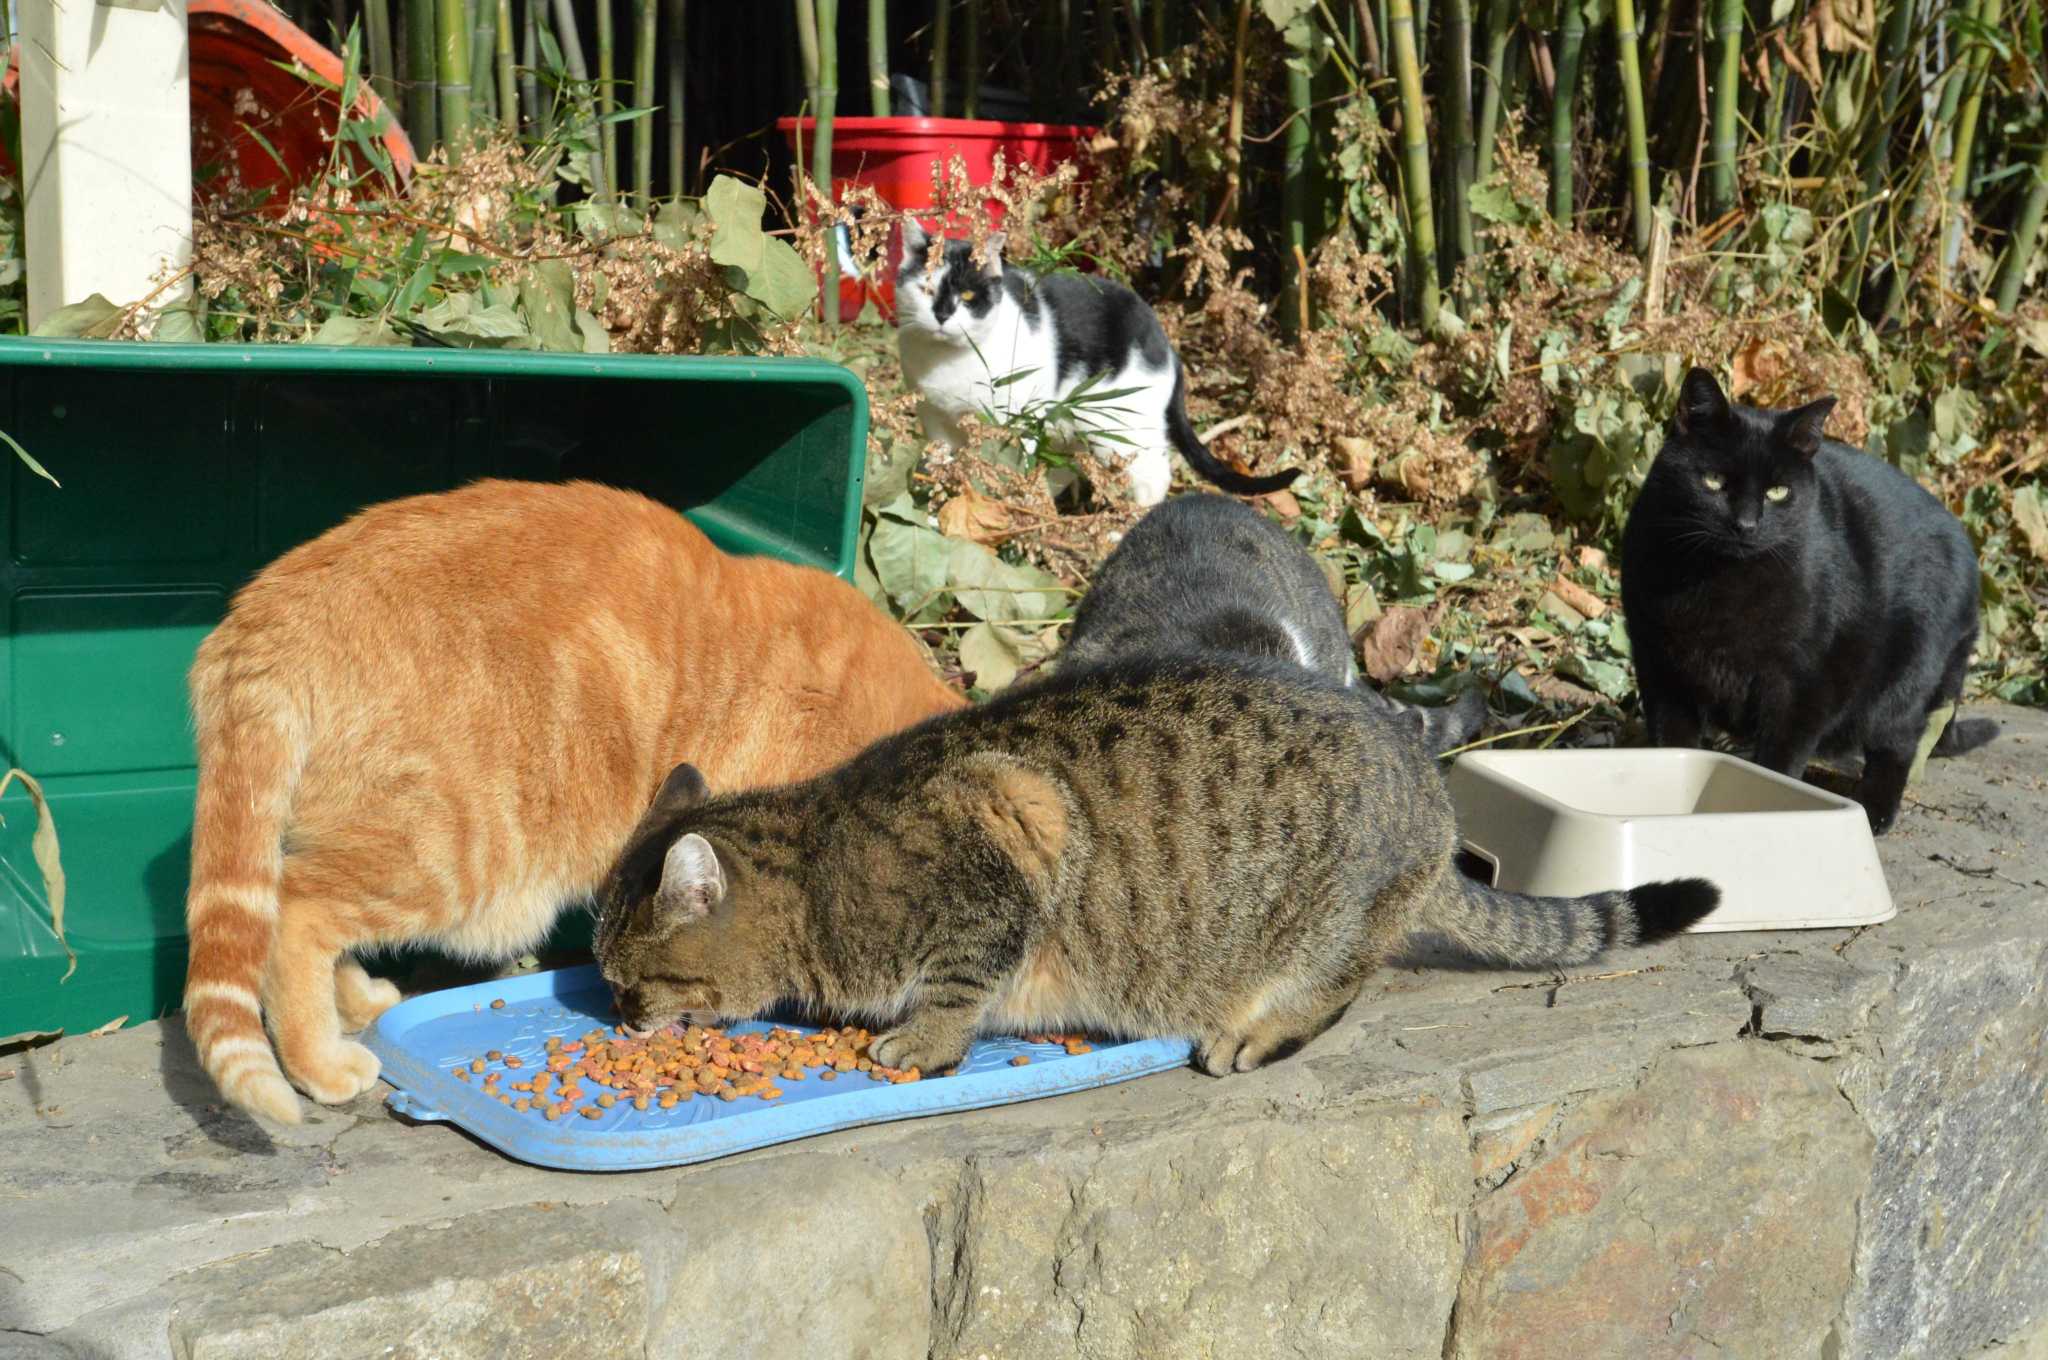 Man not a fan of of his neighbor feeding feral cats